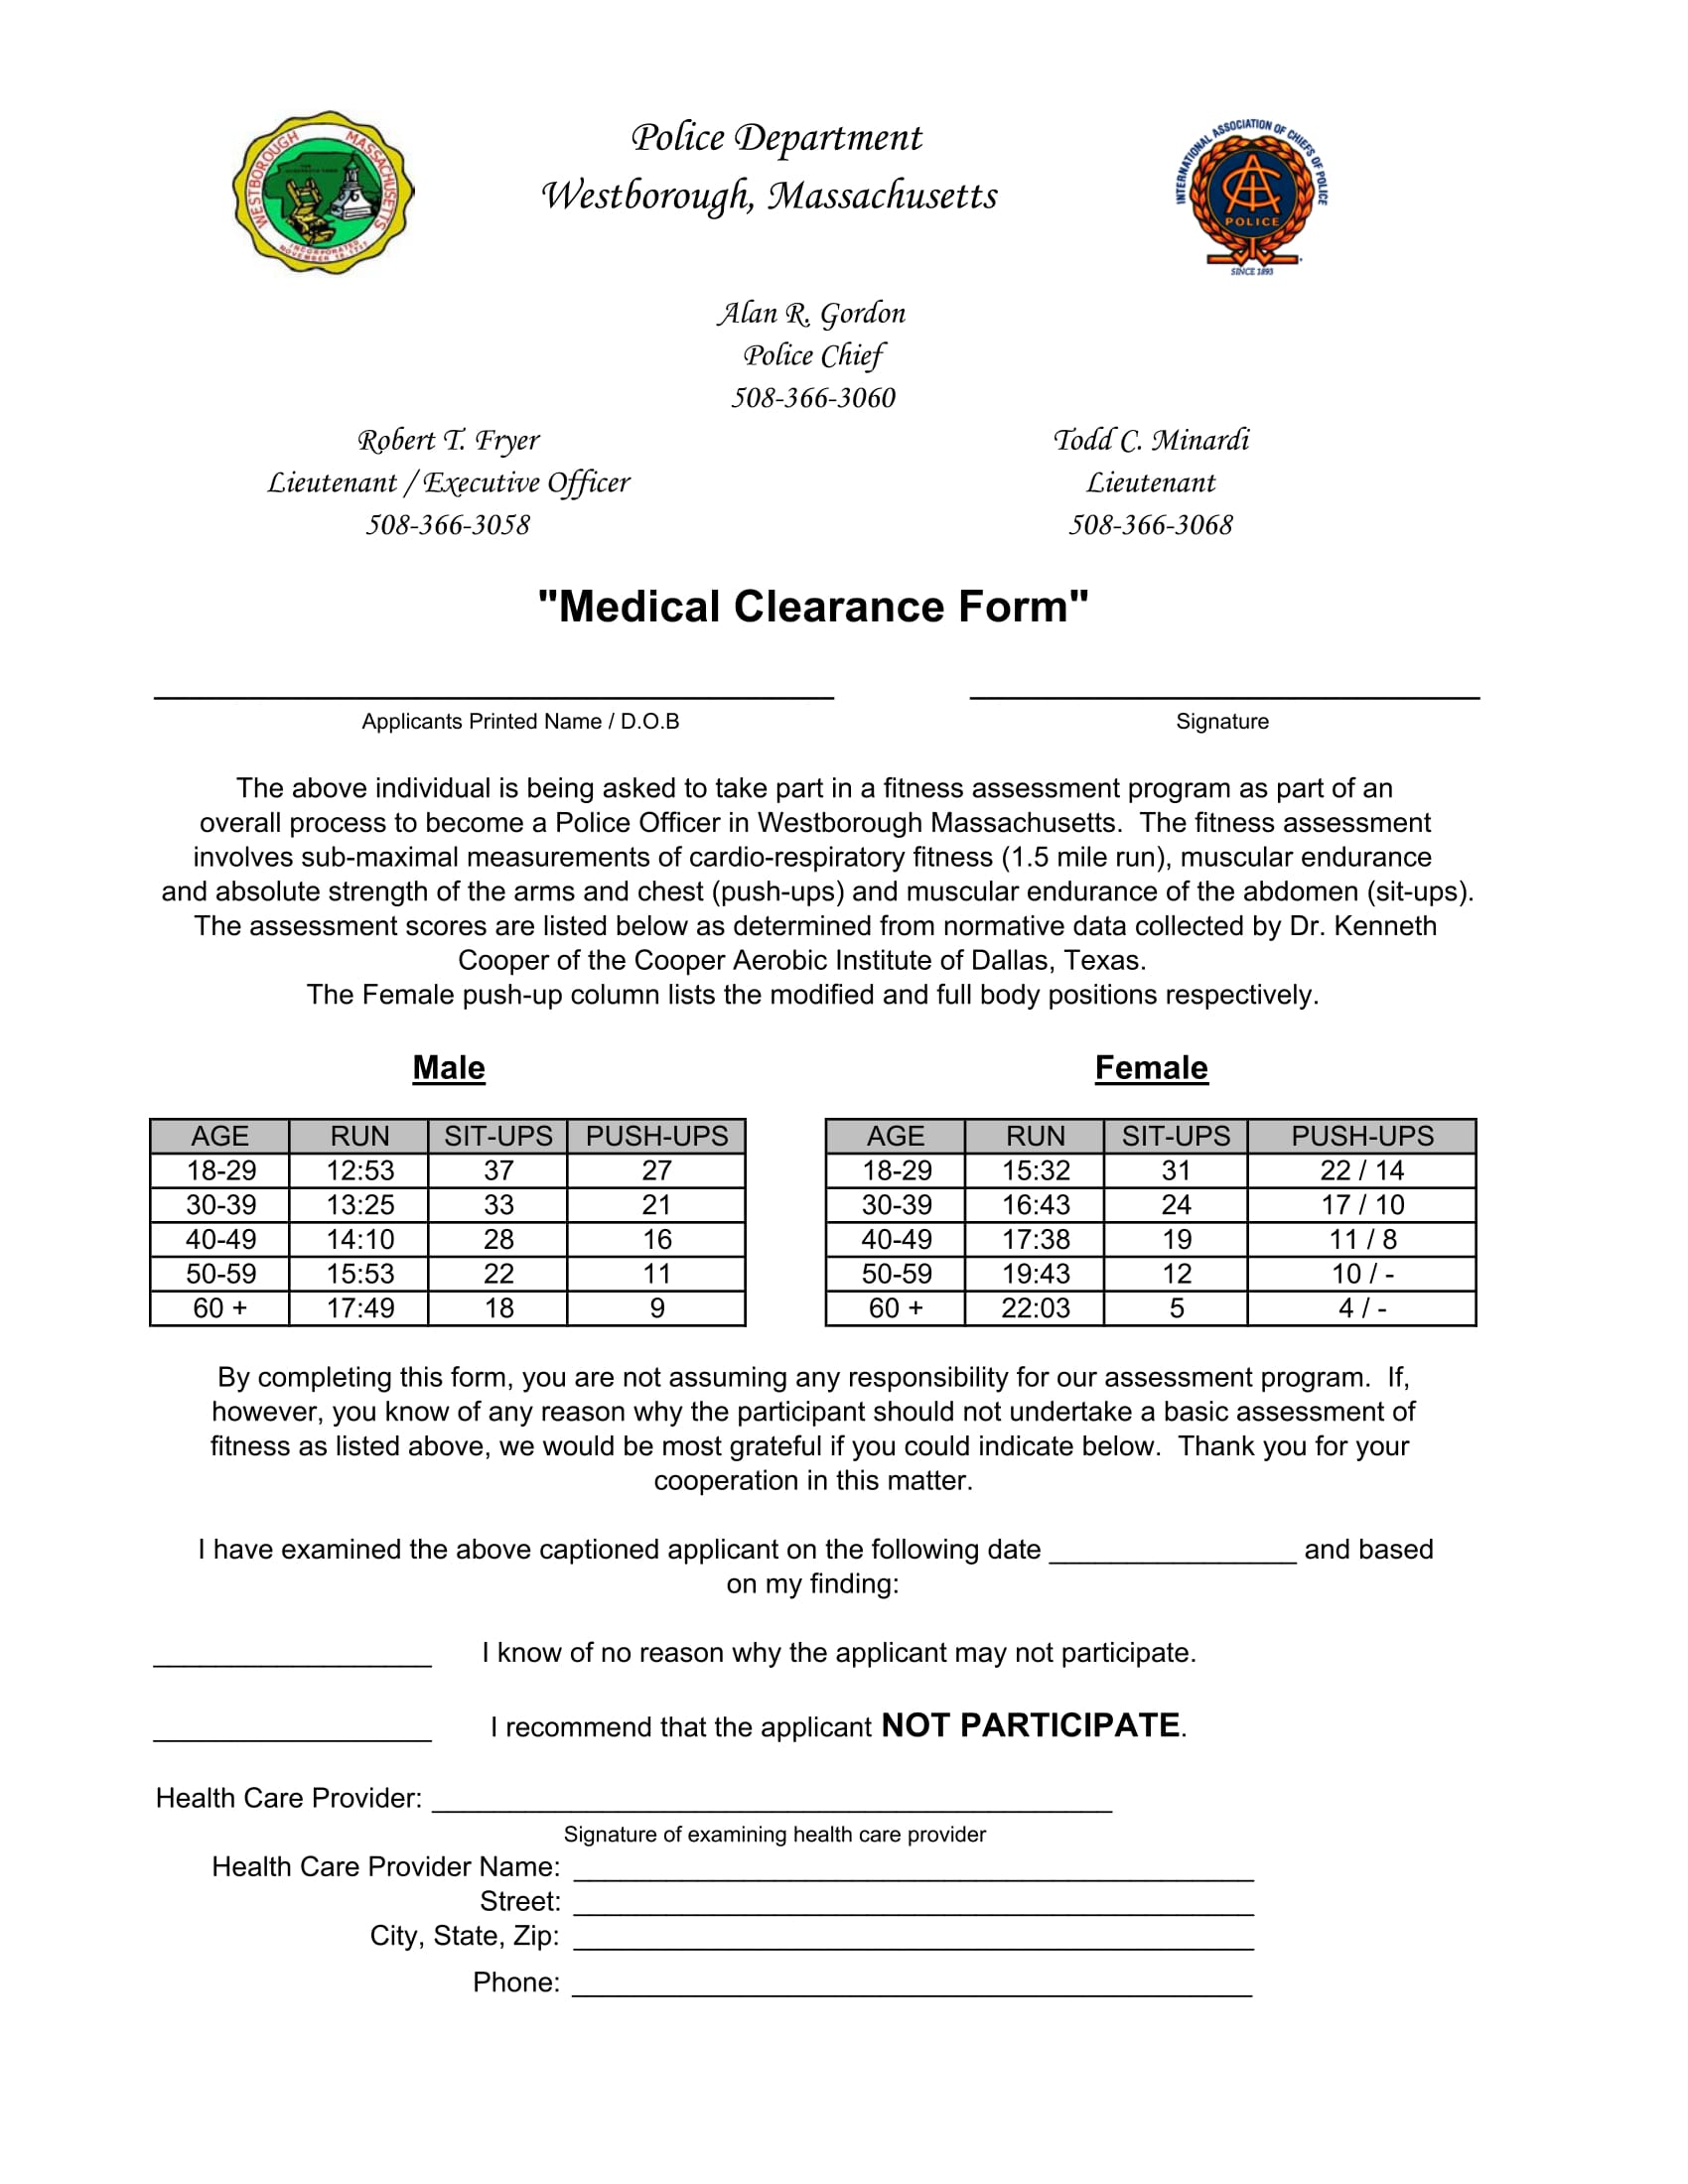 police officer medical clearance form 1